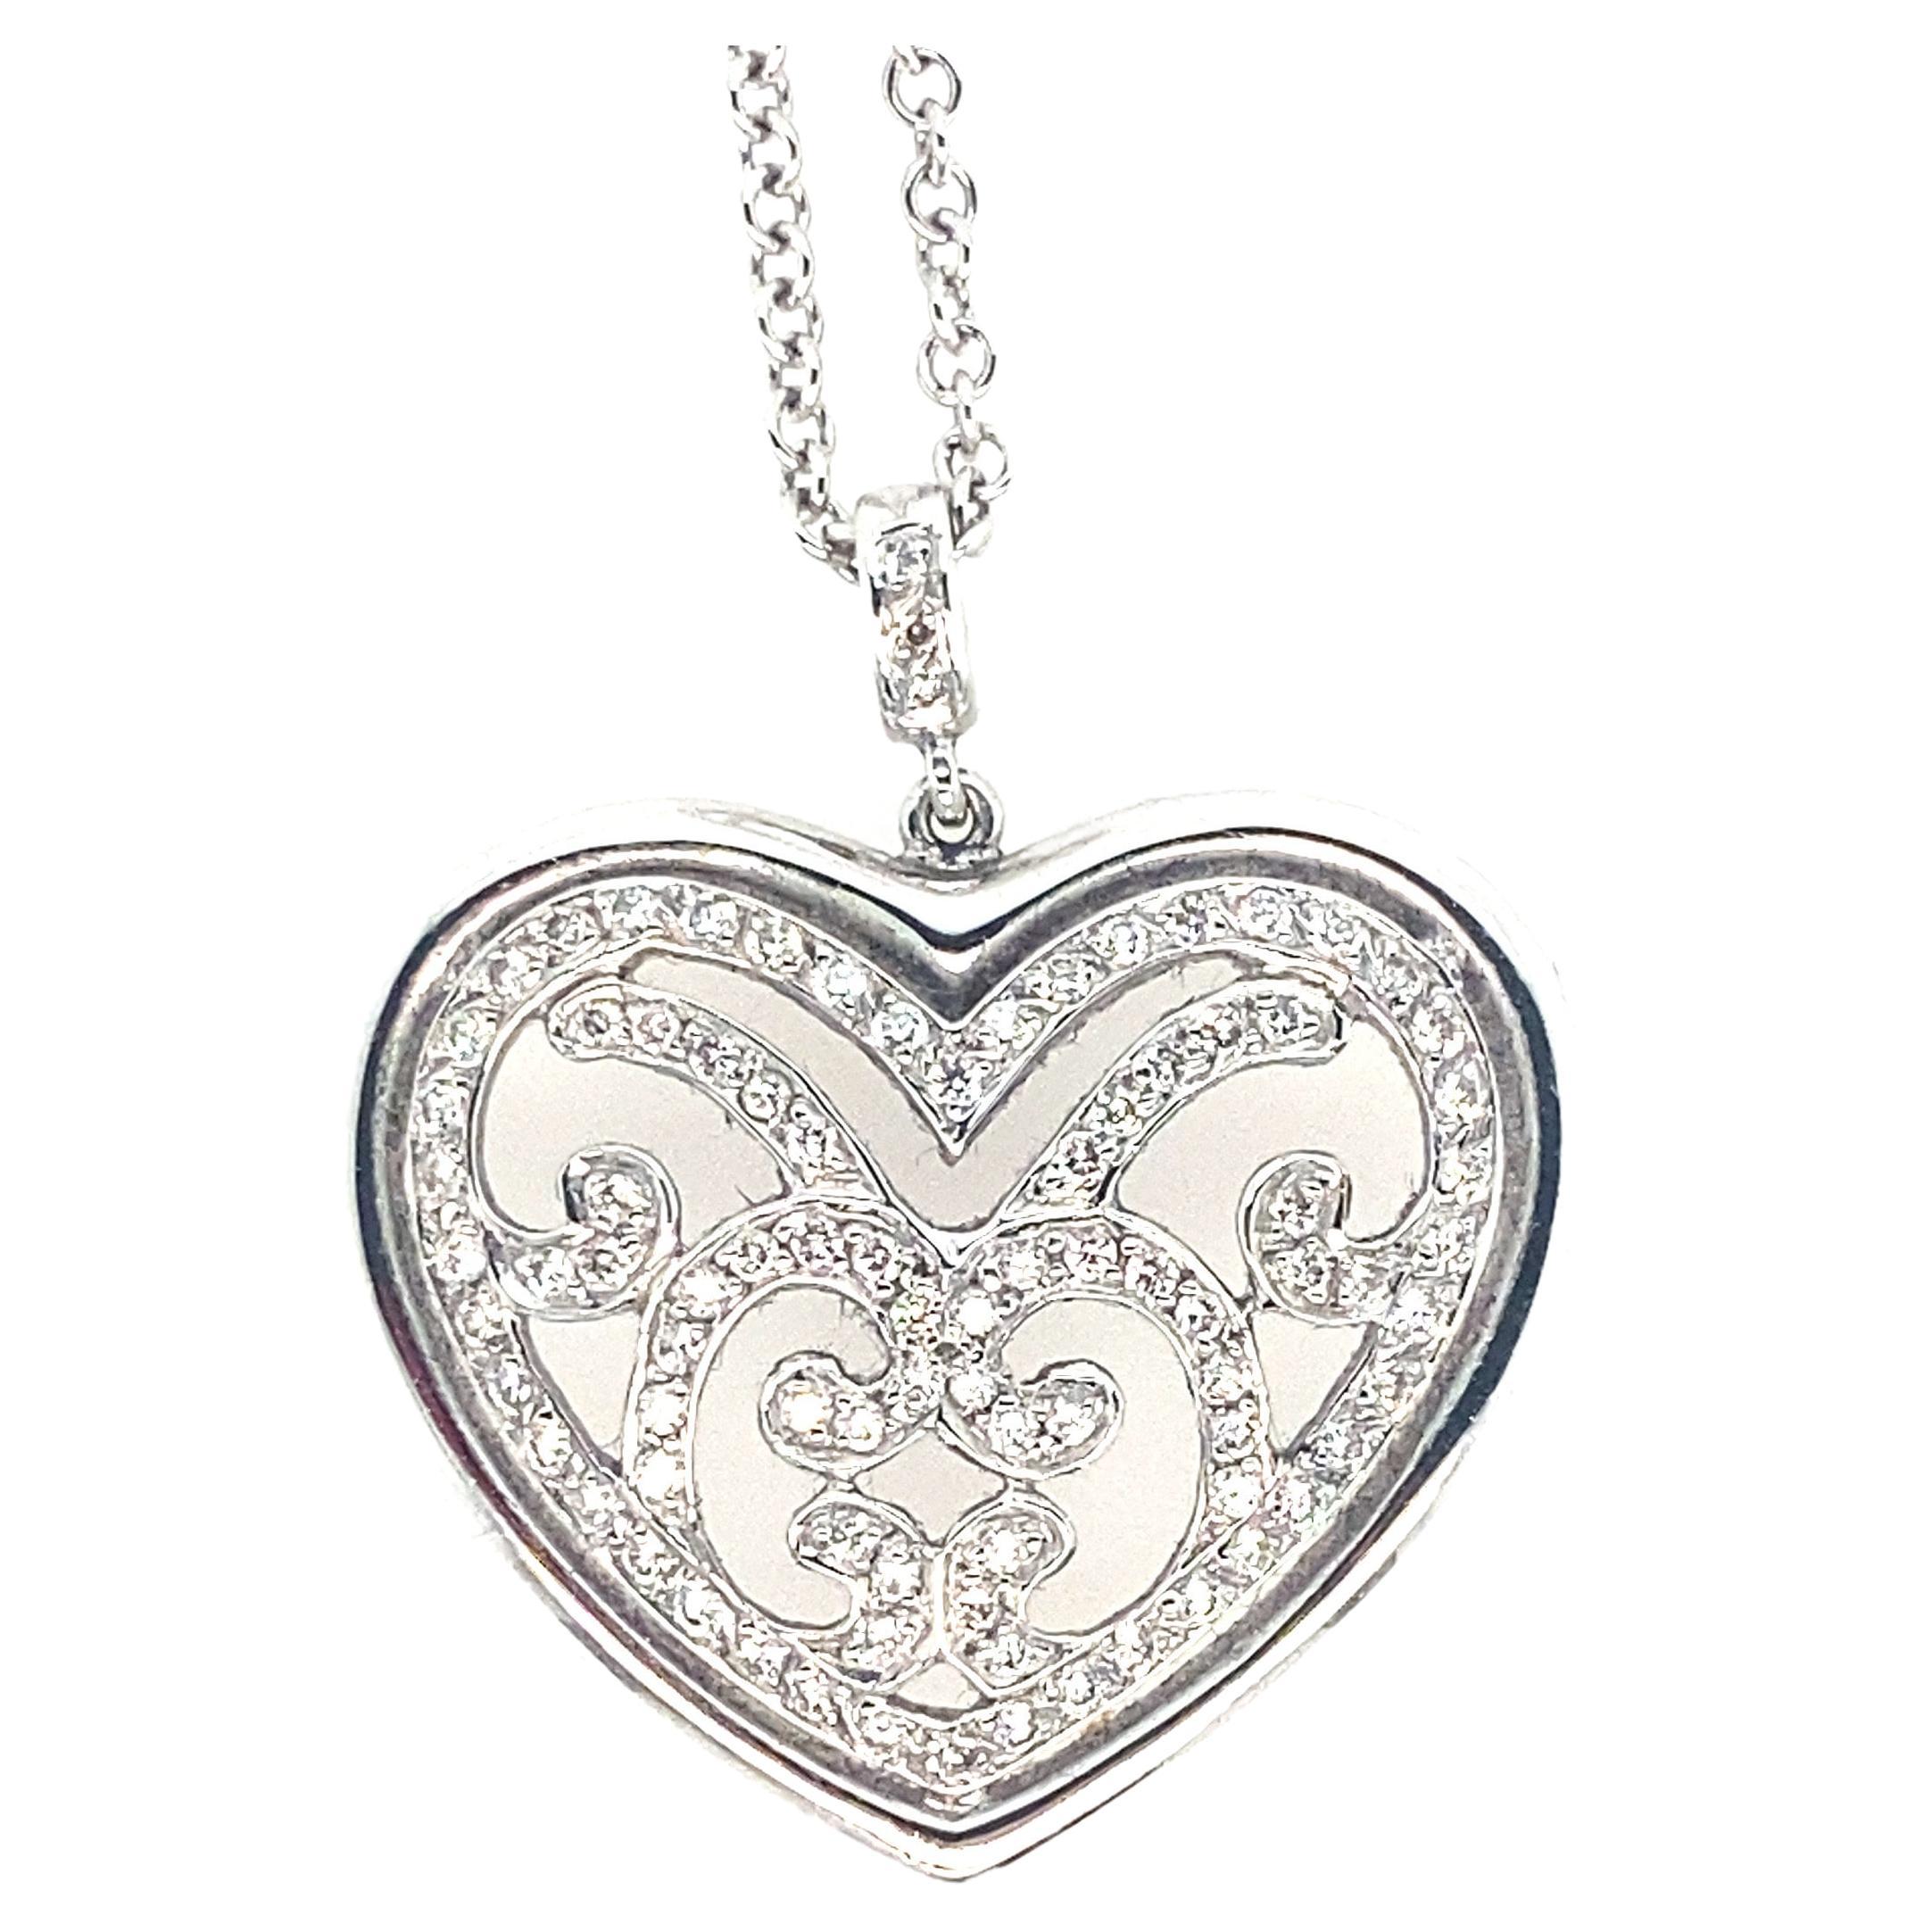 Spectacular 18 Karat Gold and Diamond Heart Pendant and Chain For Sale